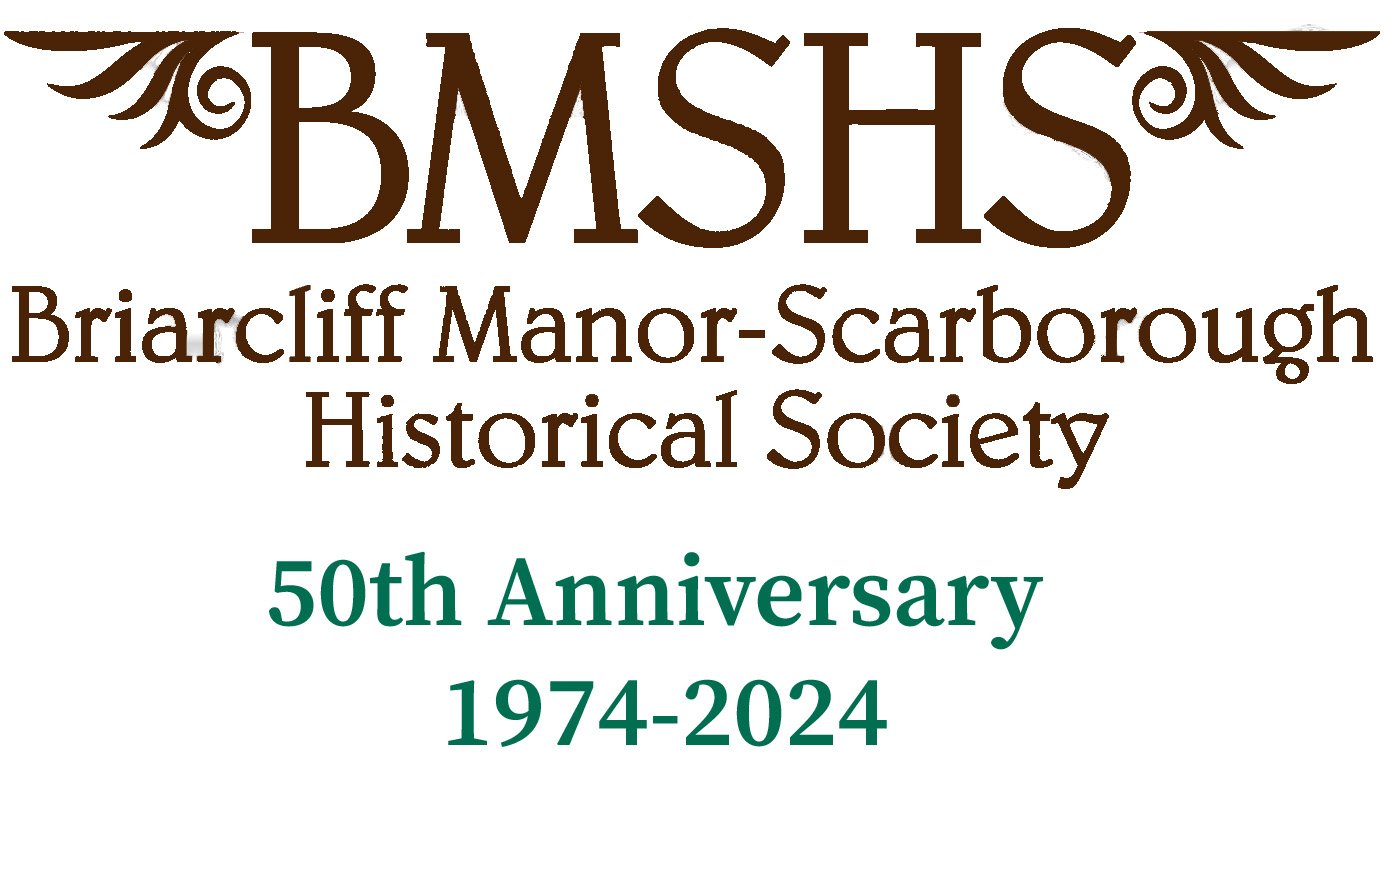 Briarcliff Manor-Scarborough Historical Society